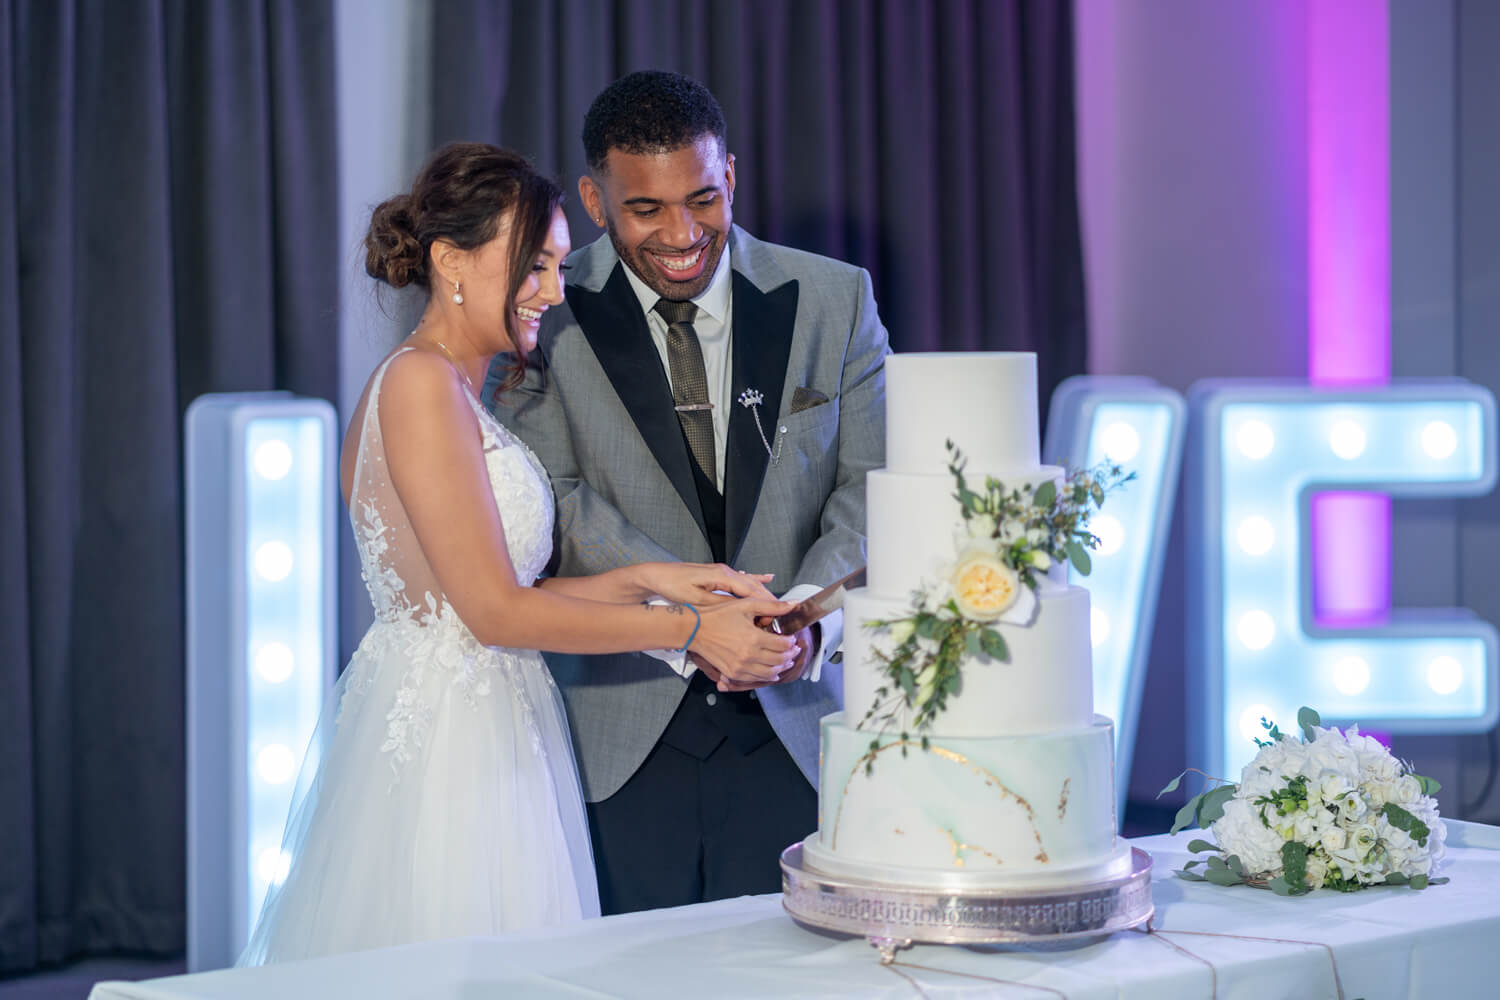 bride and groom cut the cake with love letters lit up behind them